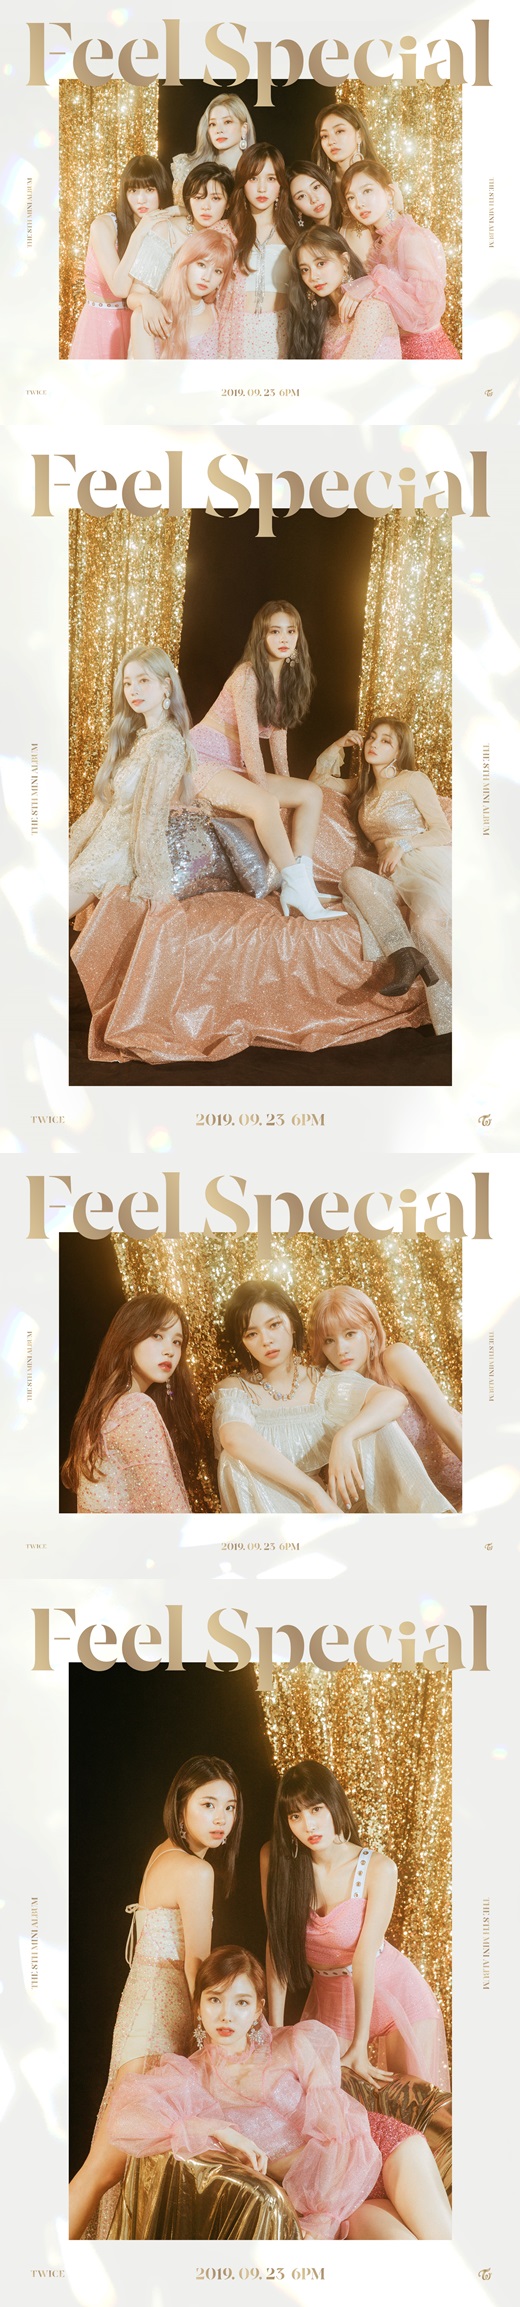 Group TWICE first unveiled a nine-member complete Teaser.JYP Entertainment, a subsidiary company, opened the group image of the TWICE Mini 8th album Feel Special (Phil Special) for the first time on official SNS at 0:00 today (18th).In the photo, TWICE attracted attention by directing a scene in the movie in the background of a brilliant golden curtain.Especially, Mina, who decided to join carefully, gathered together with the members, and it made me feel sad.On the same day, the three-person unit Teaser also robbed the eye with a pure and sophisticated mood.TWICE has brought up the expectation of Ones (ONCE: fandom name) by offering content with various charms such as goddess beauty, dimness, and chicness.The mini 8th title song Feel Special is a song written and composed by JYP J. Y. Park, which melts the heart of TWICE.J. Y. Park X TWICE is the strongest combination with KNOCK KNOCK (Nak Nak) and What is Love? (What Is Love?)), and Lee Woo-min, who worked on it, added to the arrangement and approached the 12th consecutive hit.In addition, the song 21:29 is the first song by all TWICE members to participate in the song, and it contains the love and gratitude for the fans.The Mini 8th album Feel Special can be found on various music sites at 6 pm on the 23rd.